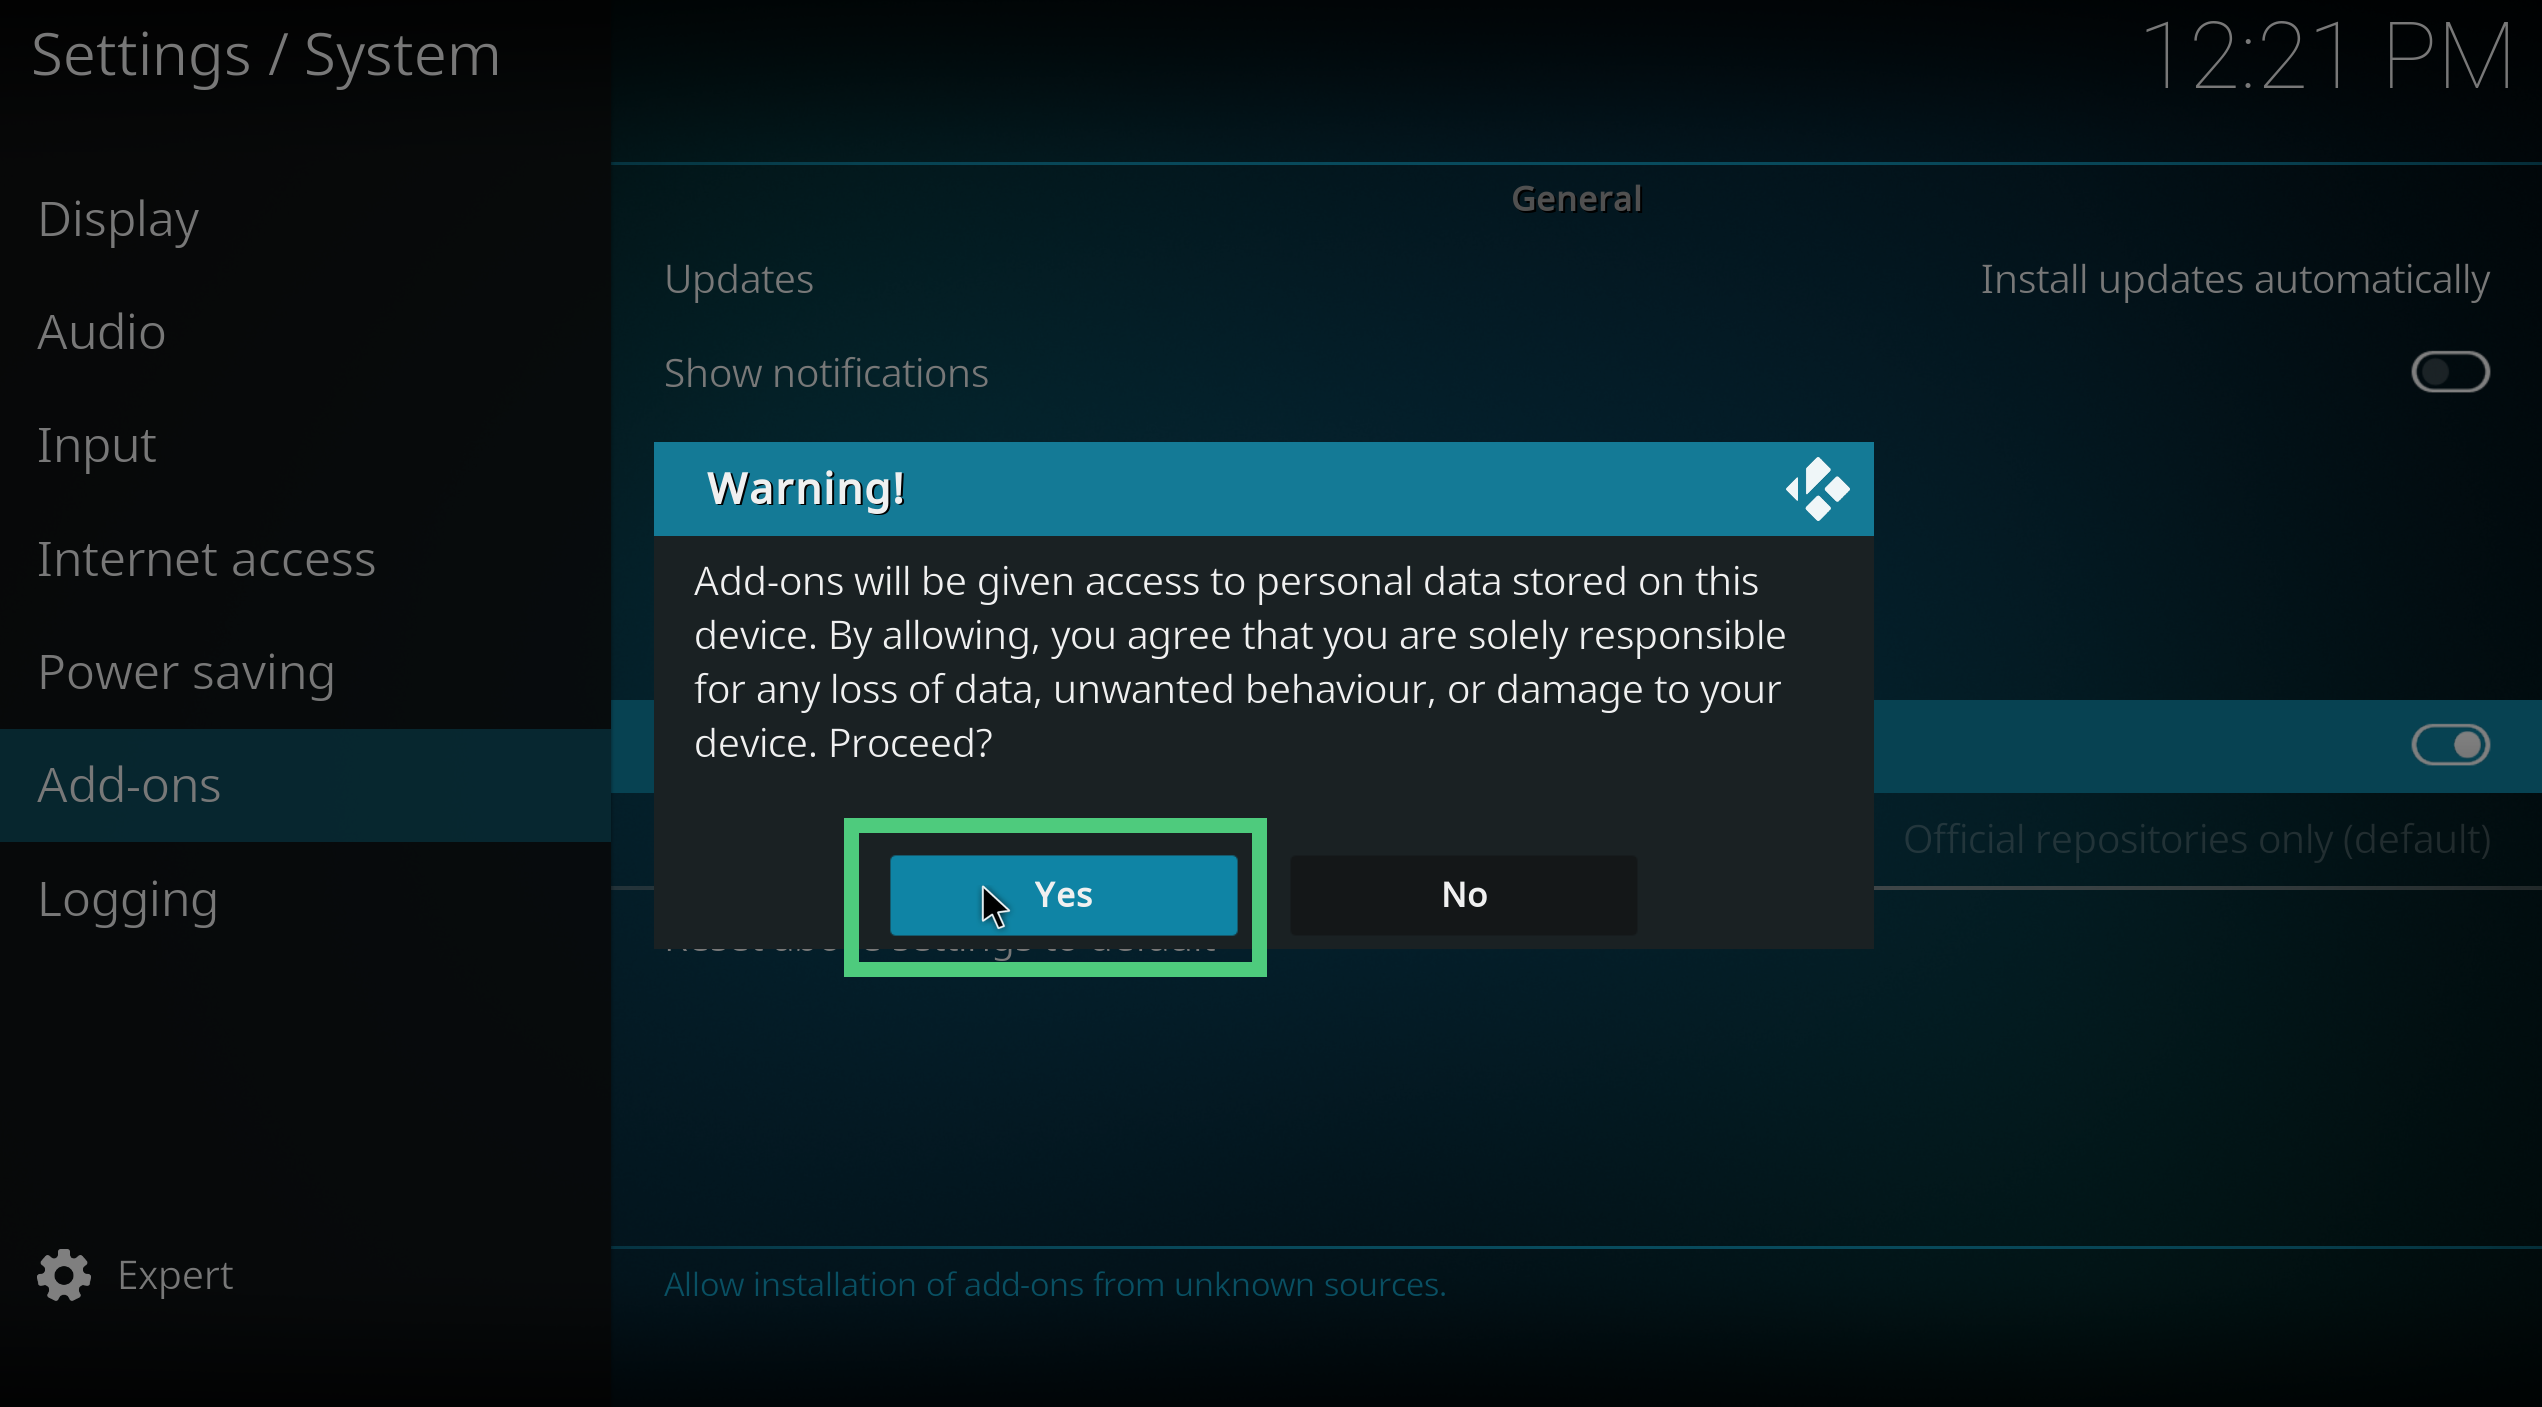 A screenshot showing how to enable unkown sources in Kodi settings